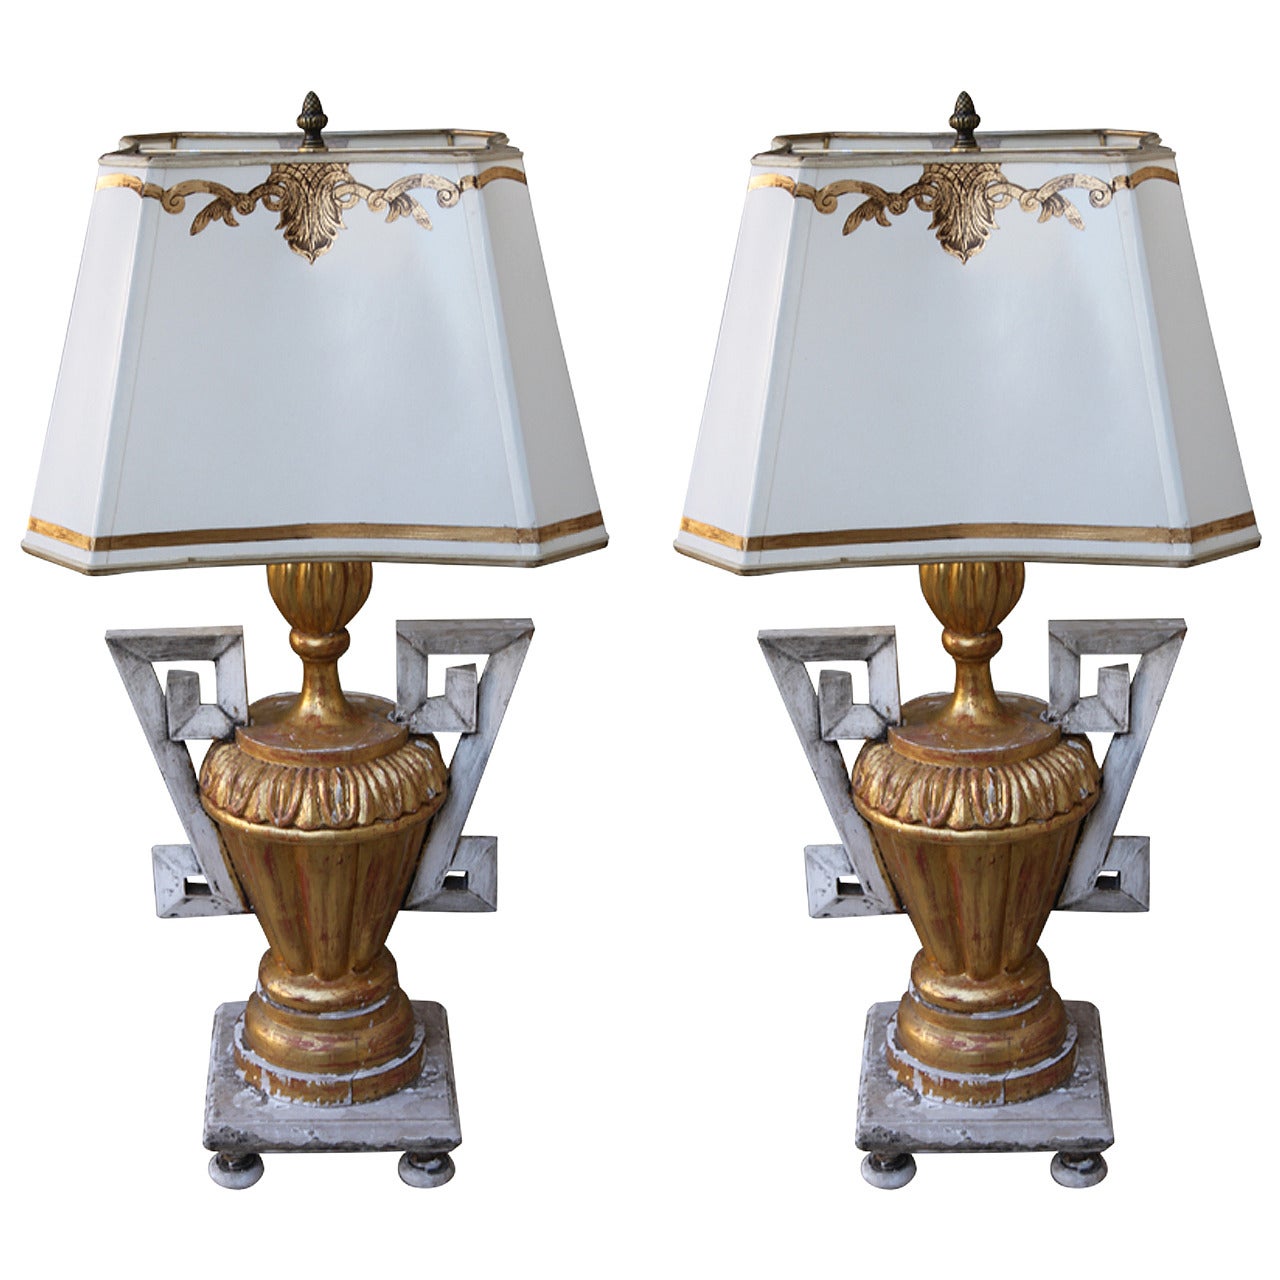 Pair of Giltwood and Painted Urn Lamps with Shades